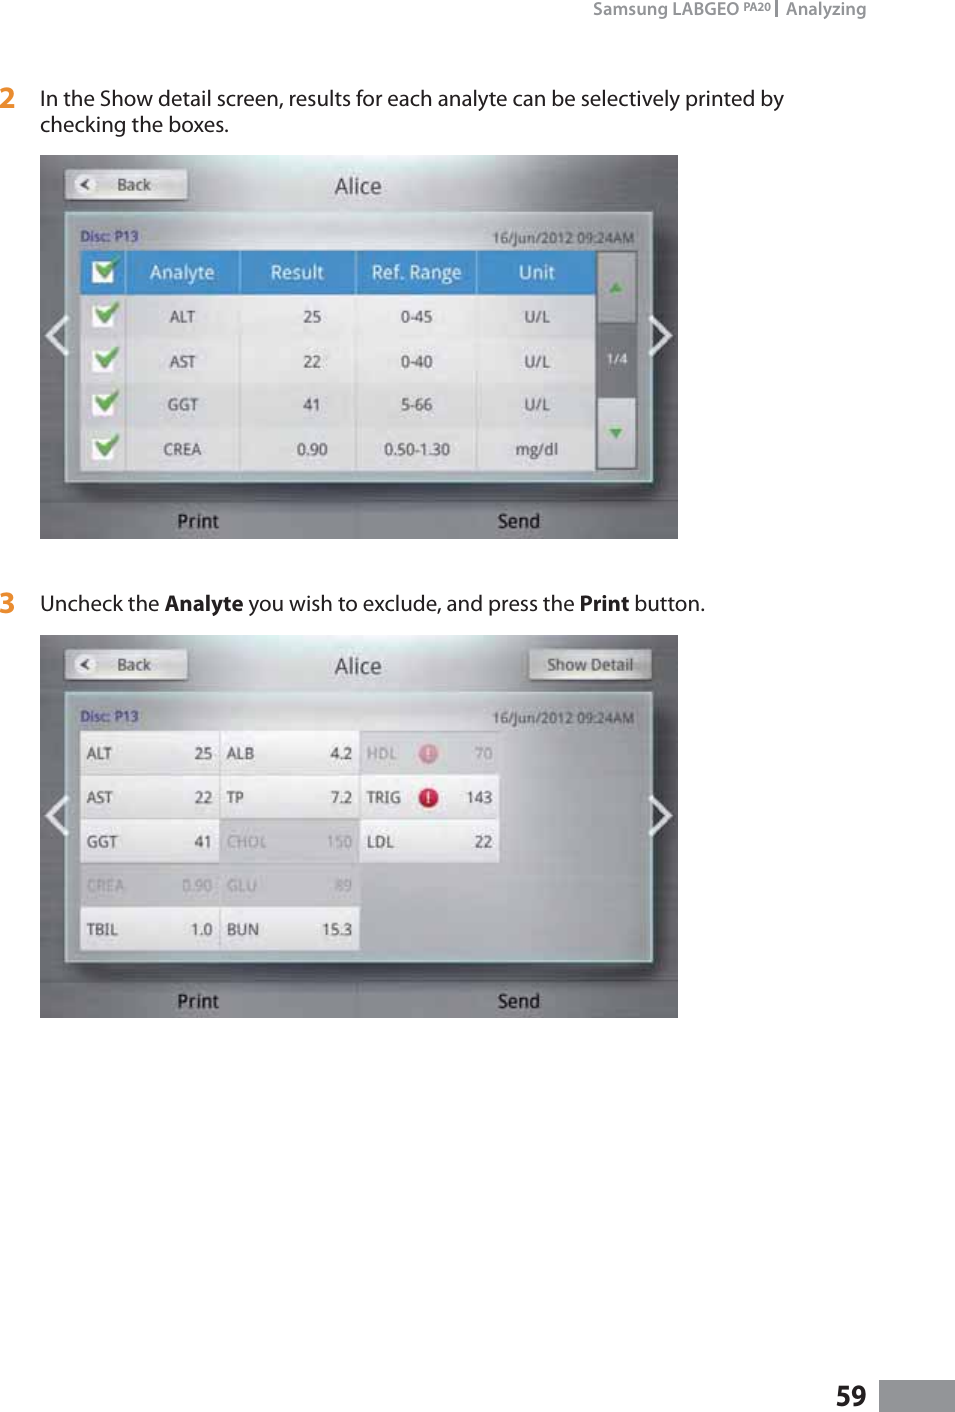 59Samsung LABGEO PA20   Analyzing2  In the Show detail screen, results for each analyte can be selectively printed by checking the boxes. 3  Uncheck the Analyte you wish to exclude, and press the Print button.